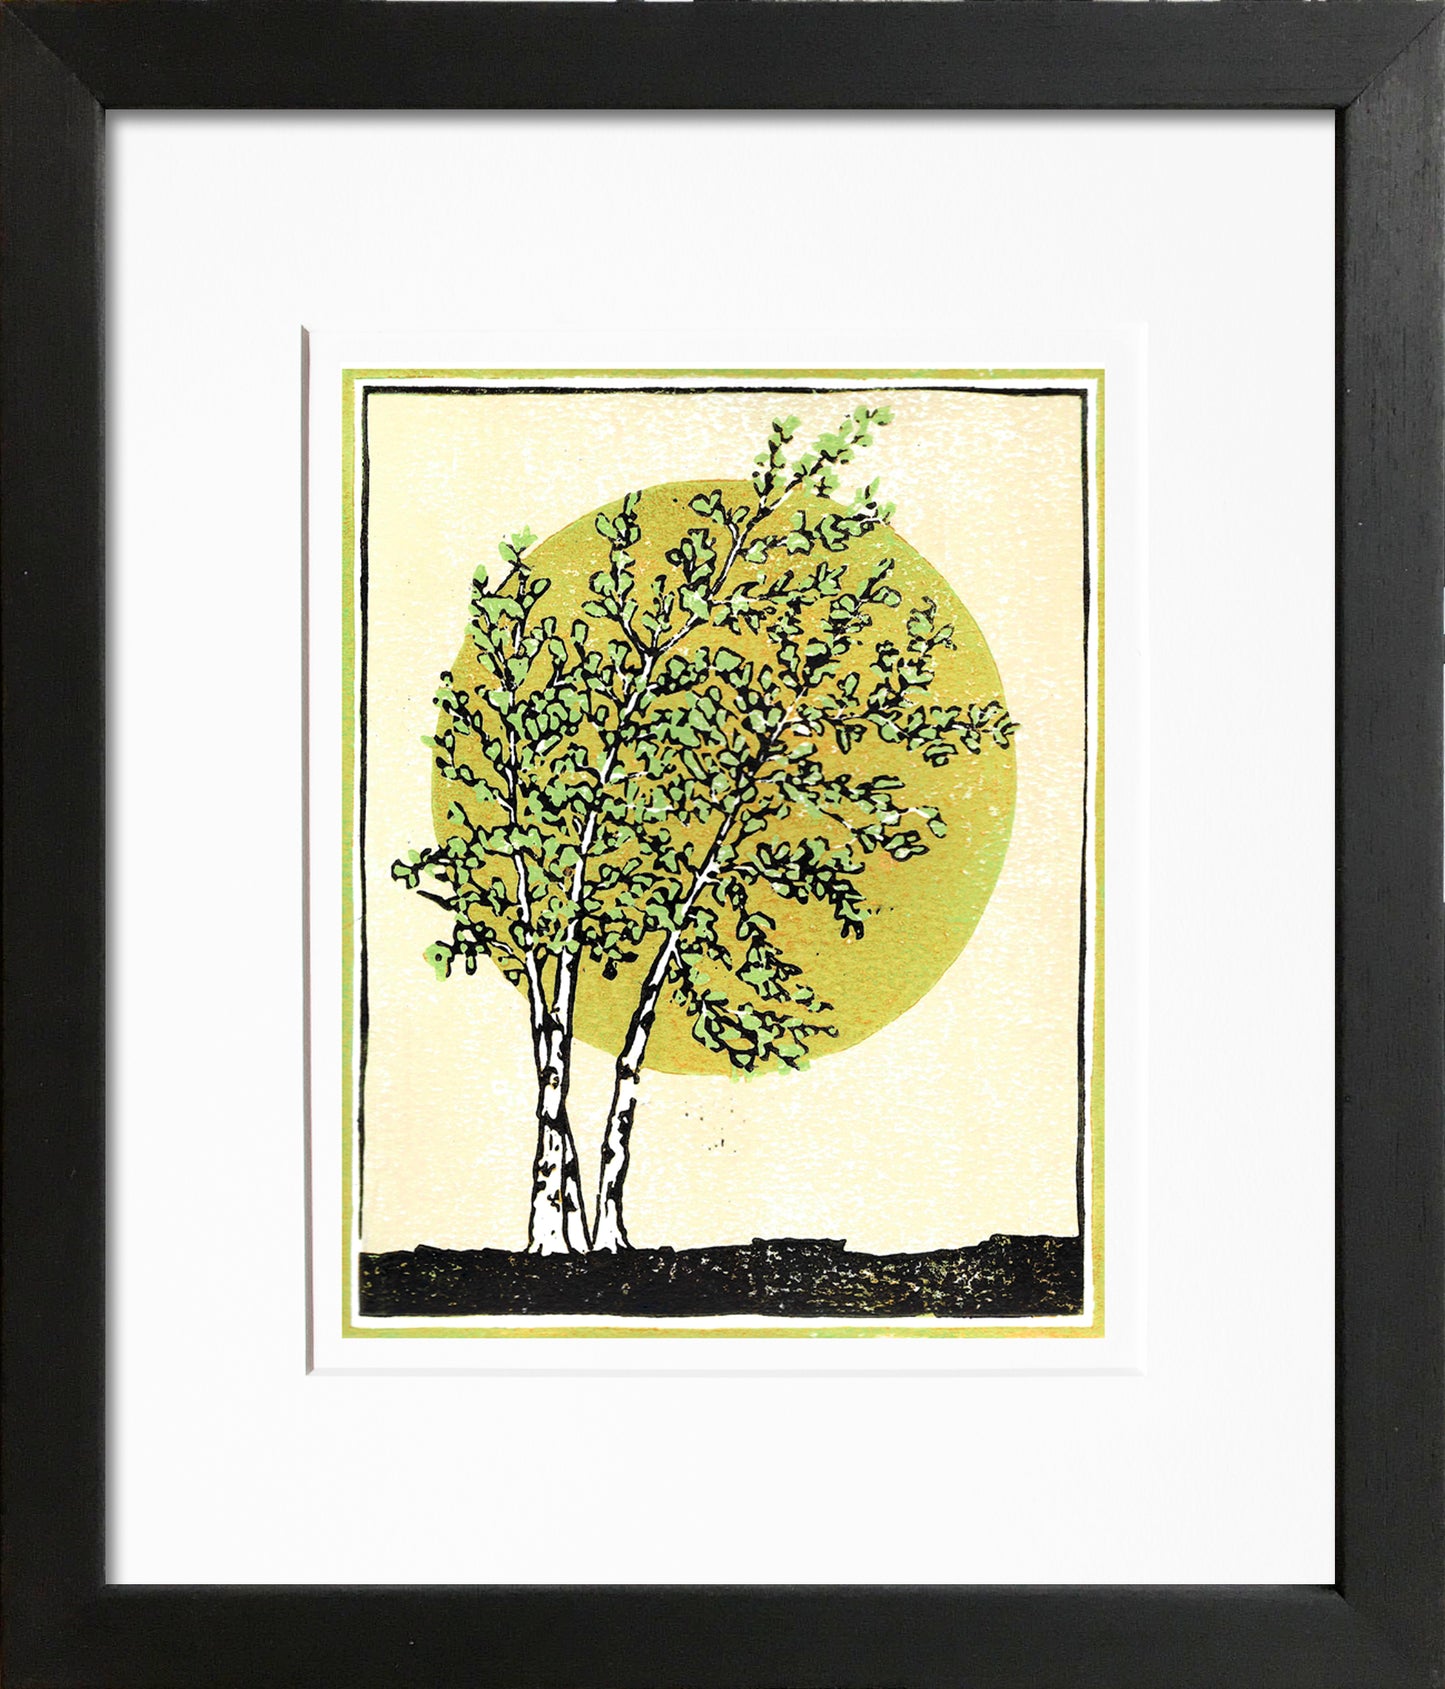 Framed birch tree art created by printmaker Natalia Wohletz of Peninsula Prints, Milford & Mackinac Island, Michigan. The original 4-color reduction block print design features a Paper Birch tree, which is native to Michigan, with the sun rising behind it.  